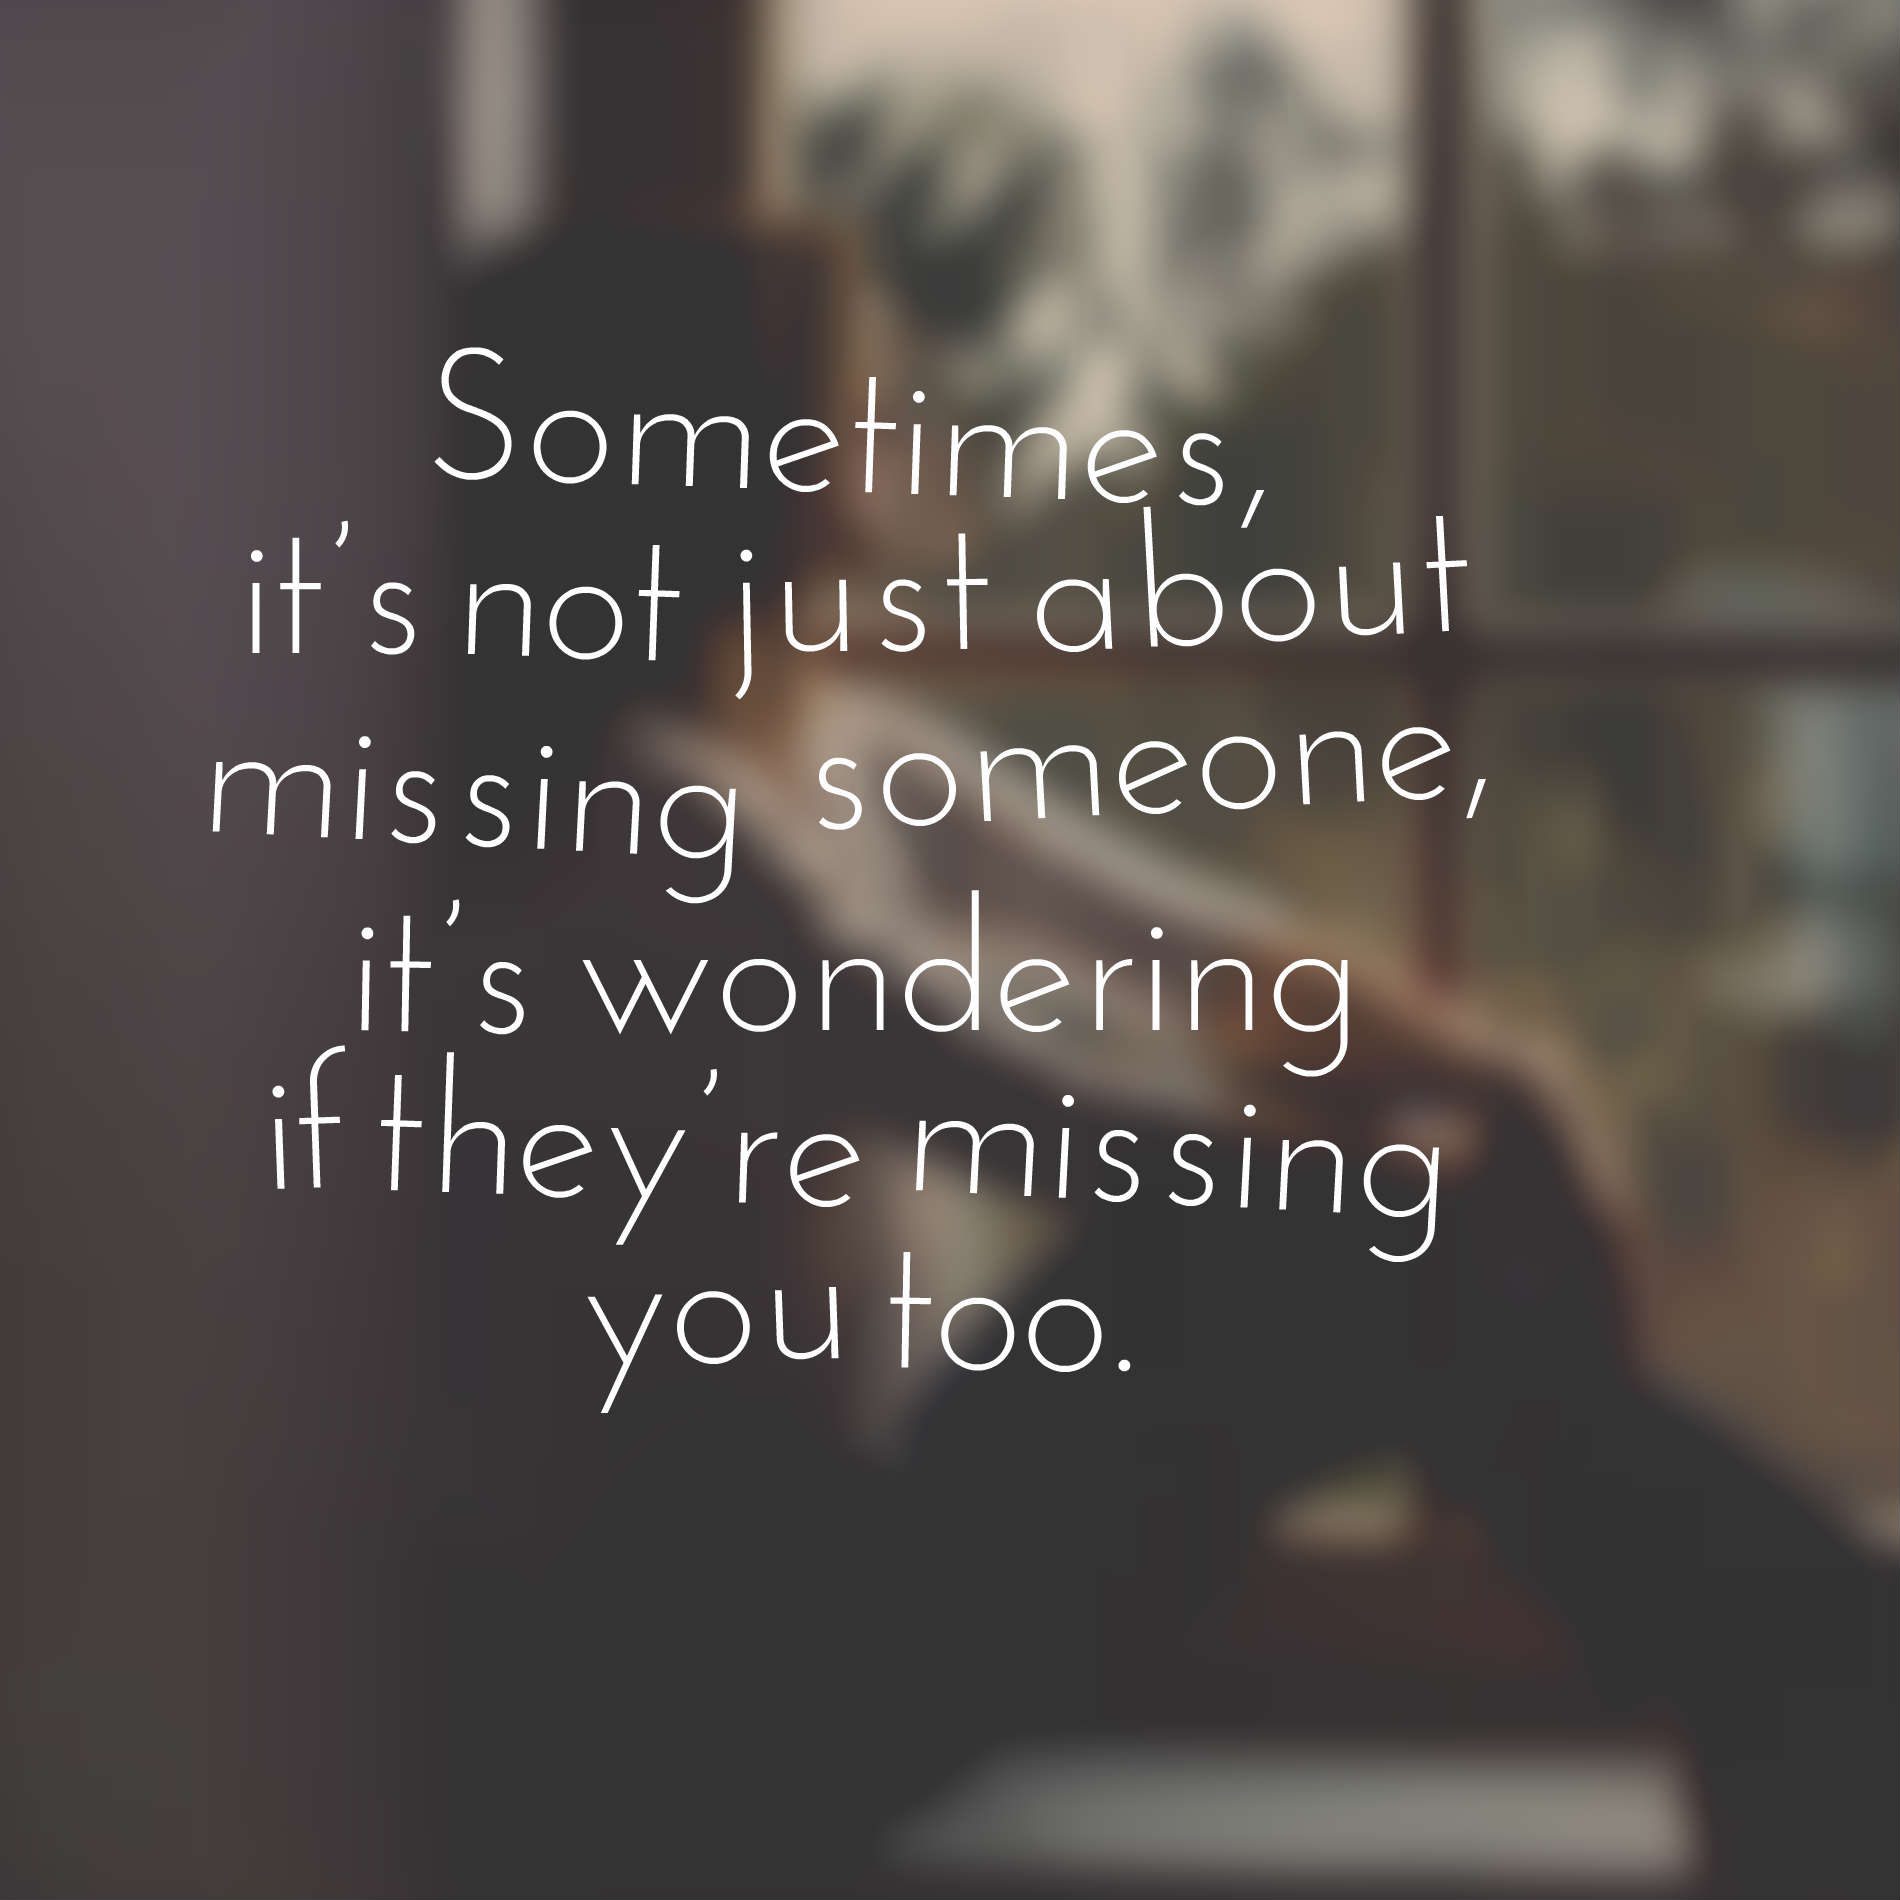 Sometimes, it’s not just about missing someone, it’s wondering if they’re missing you too.